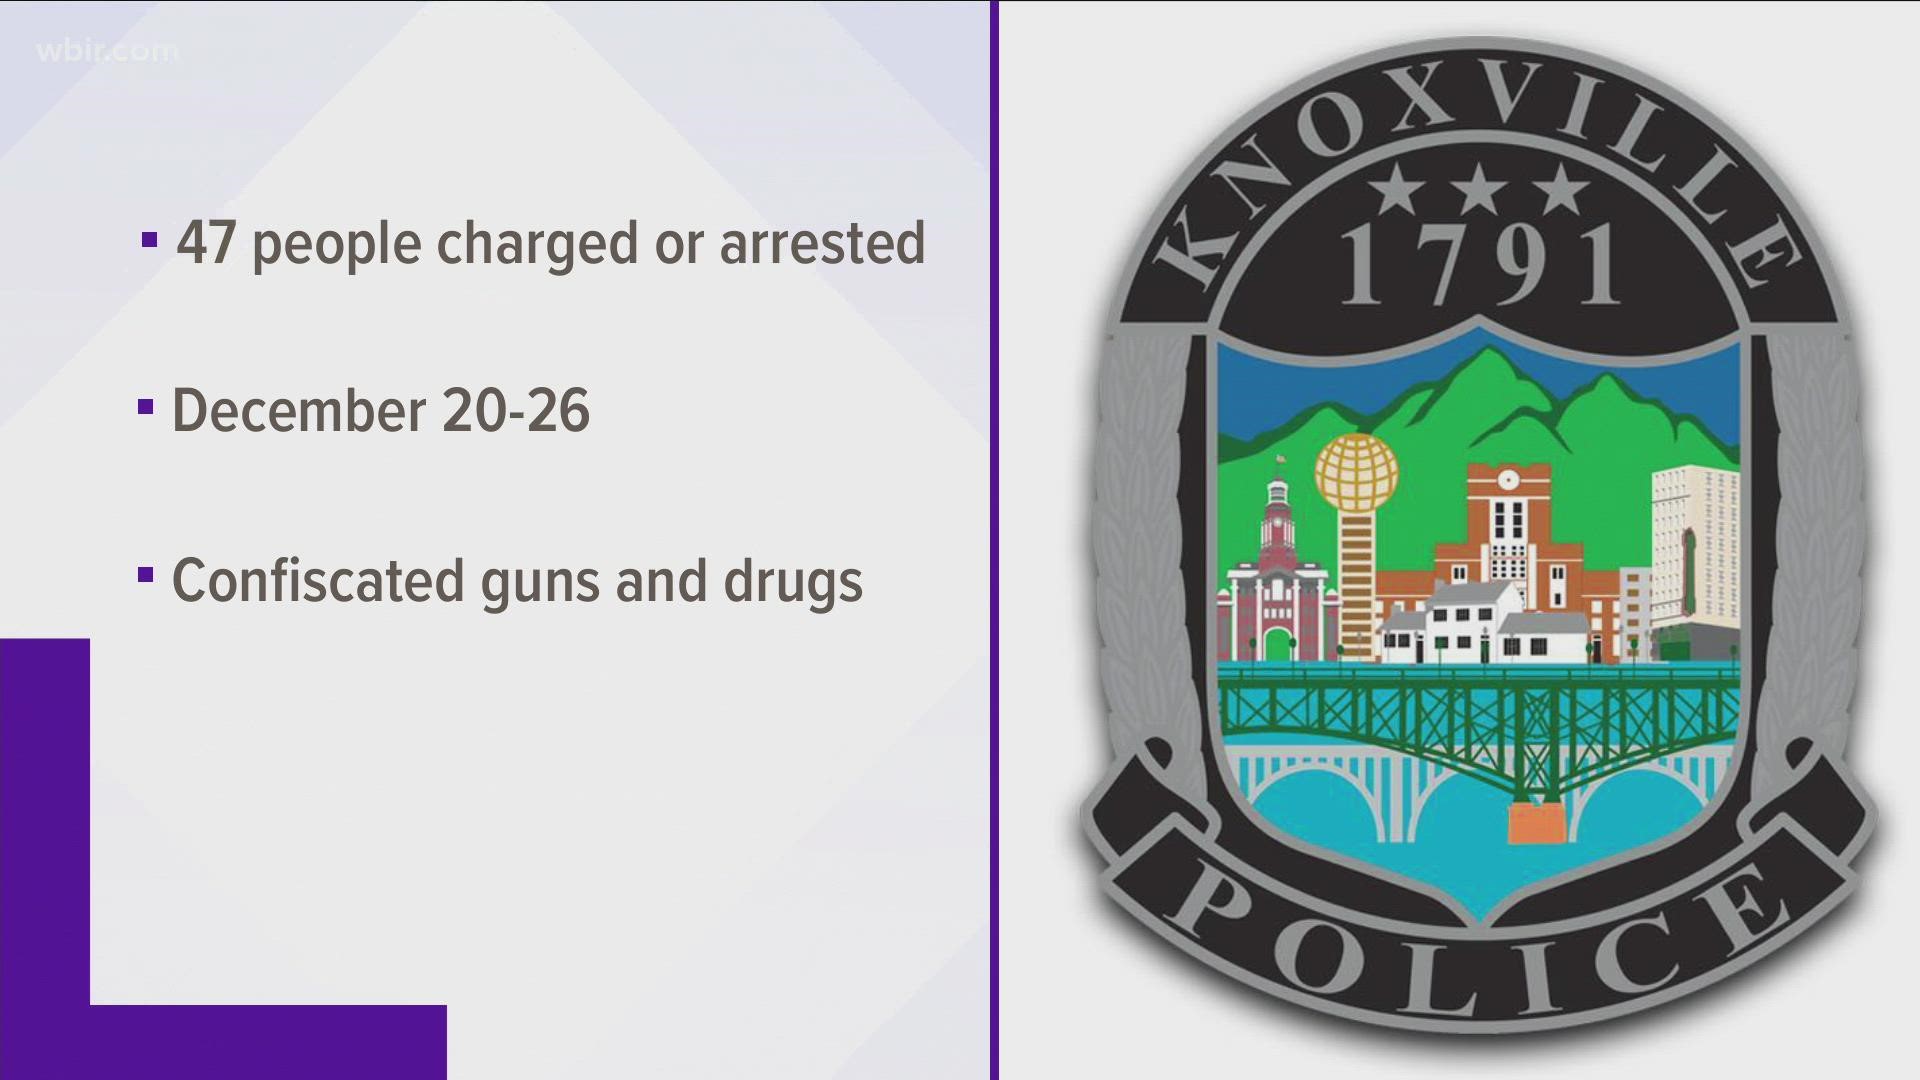 From Dec. 20 through Dec. 26, police said nearly 50 people were charged or arrested due to drug possession or illegally having a gun.